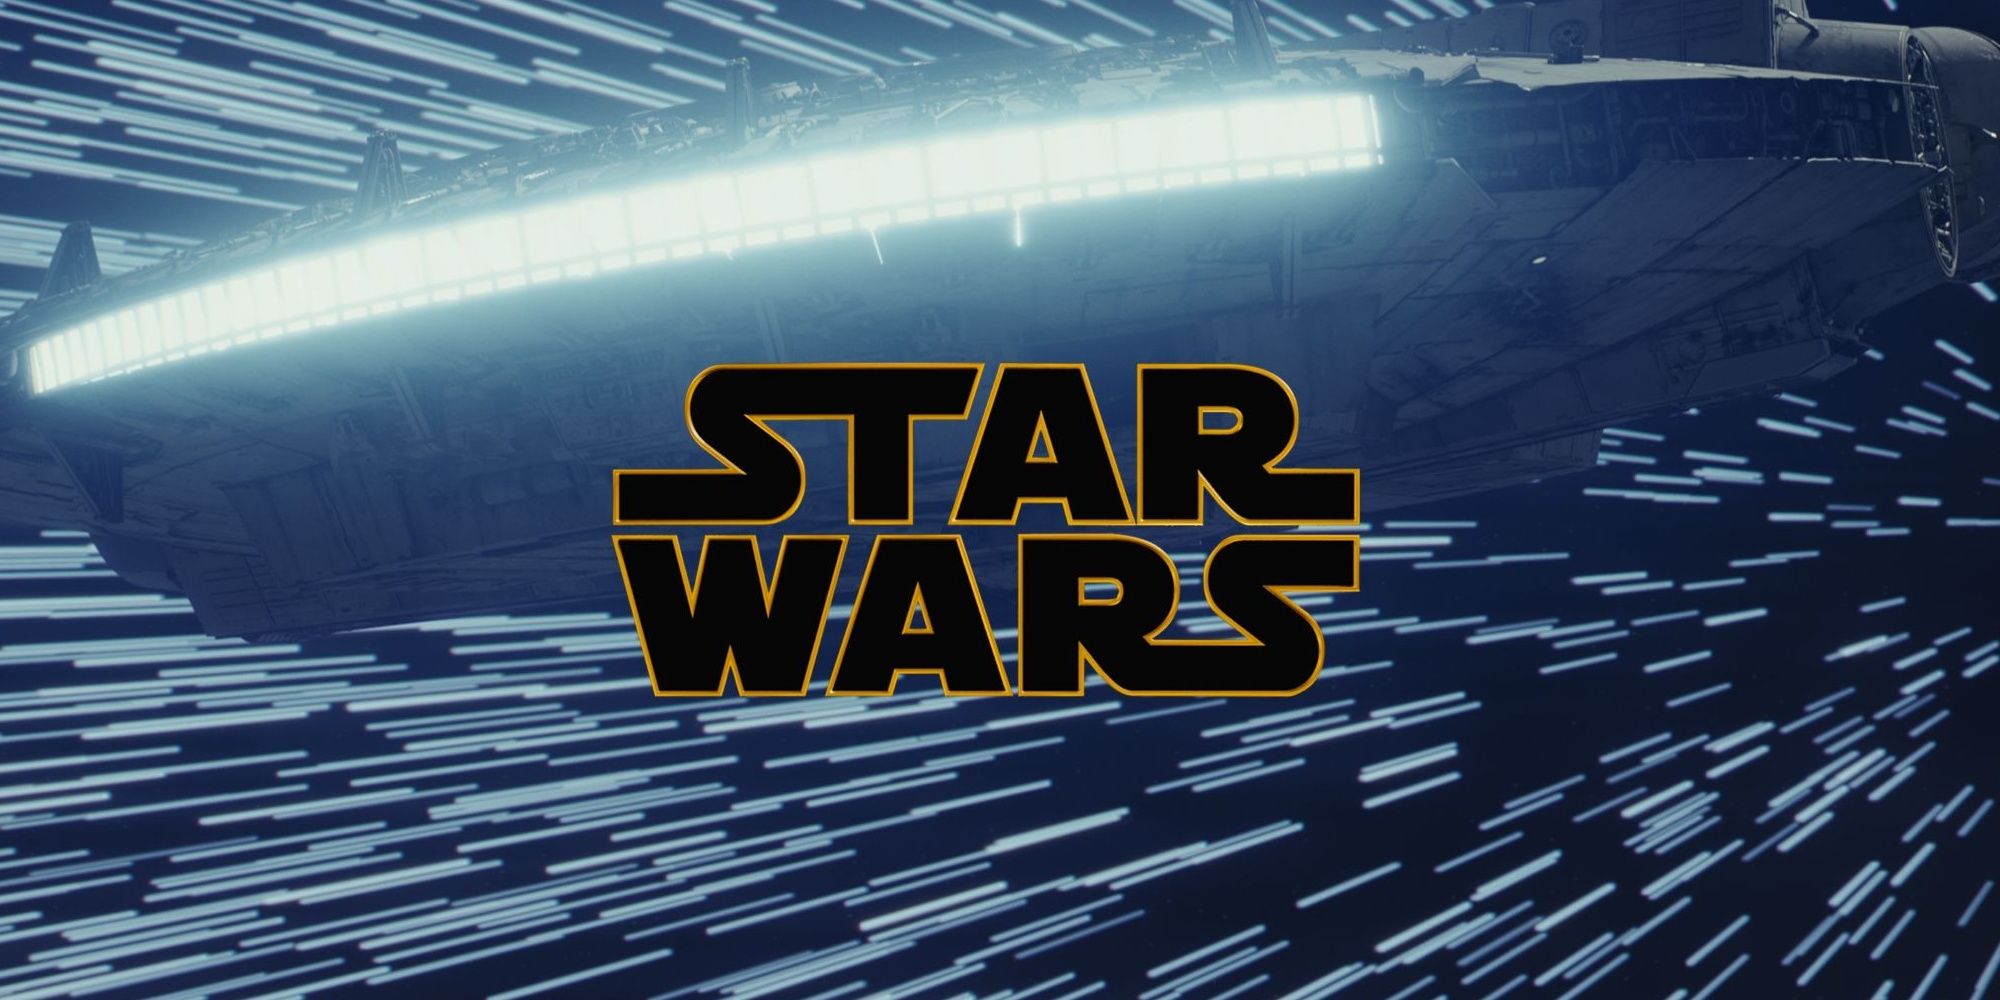 Behind the yellow outlined Star Wars logo is an image of the Millenium Falcon in hyperspace